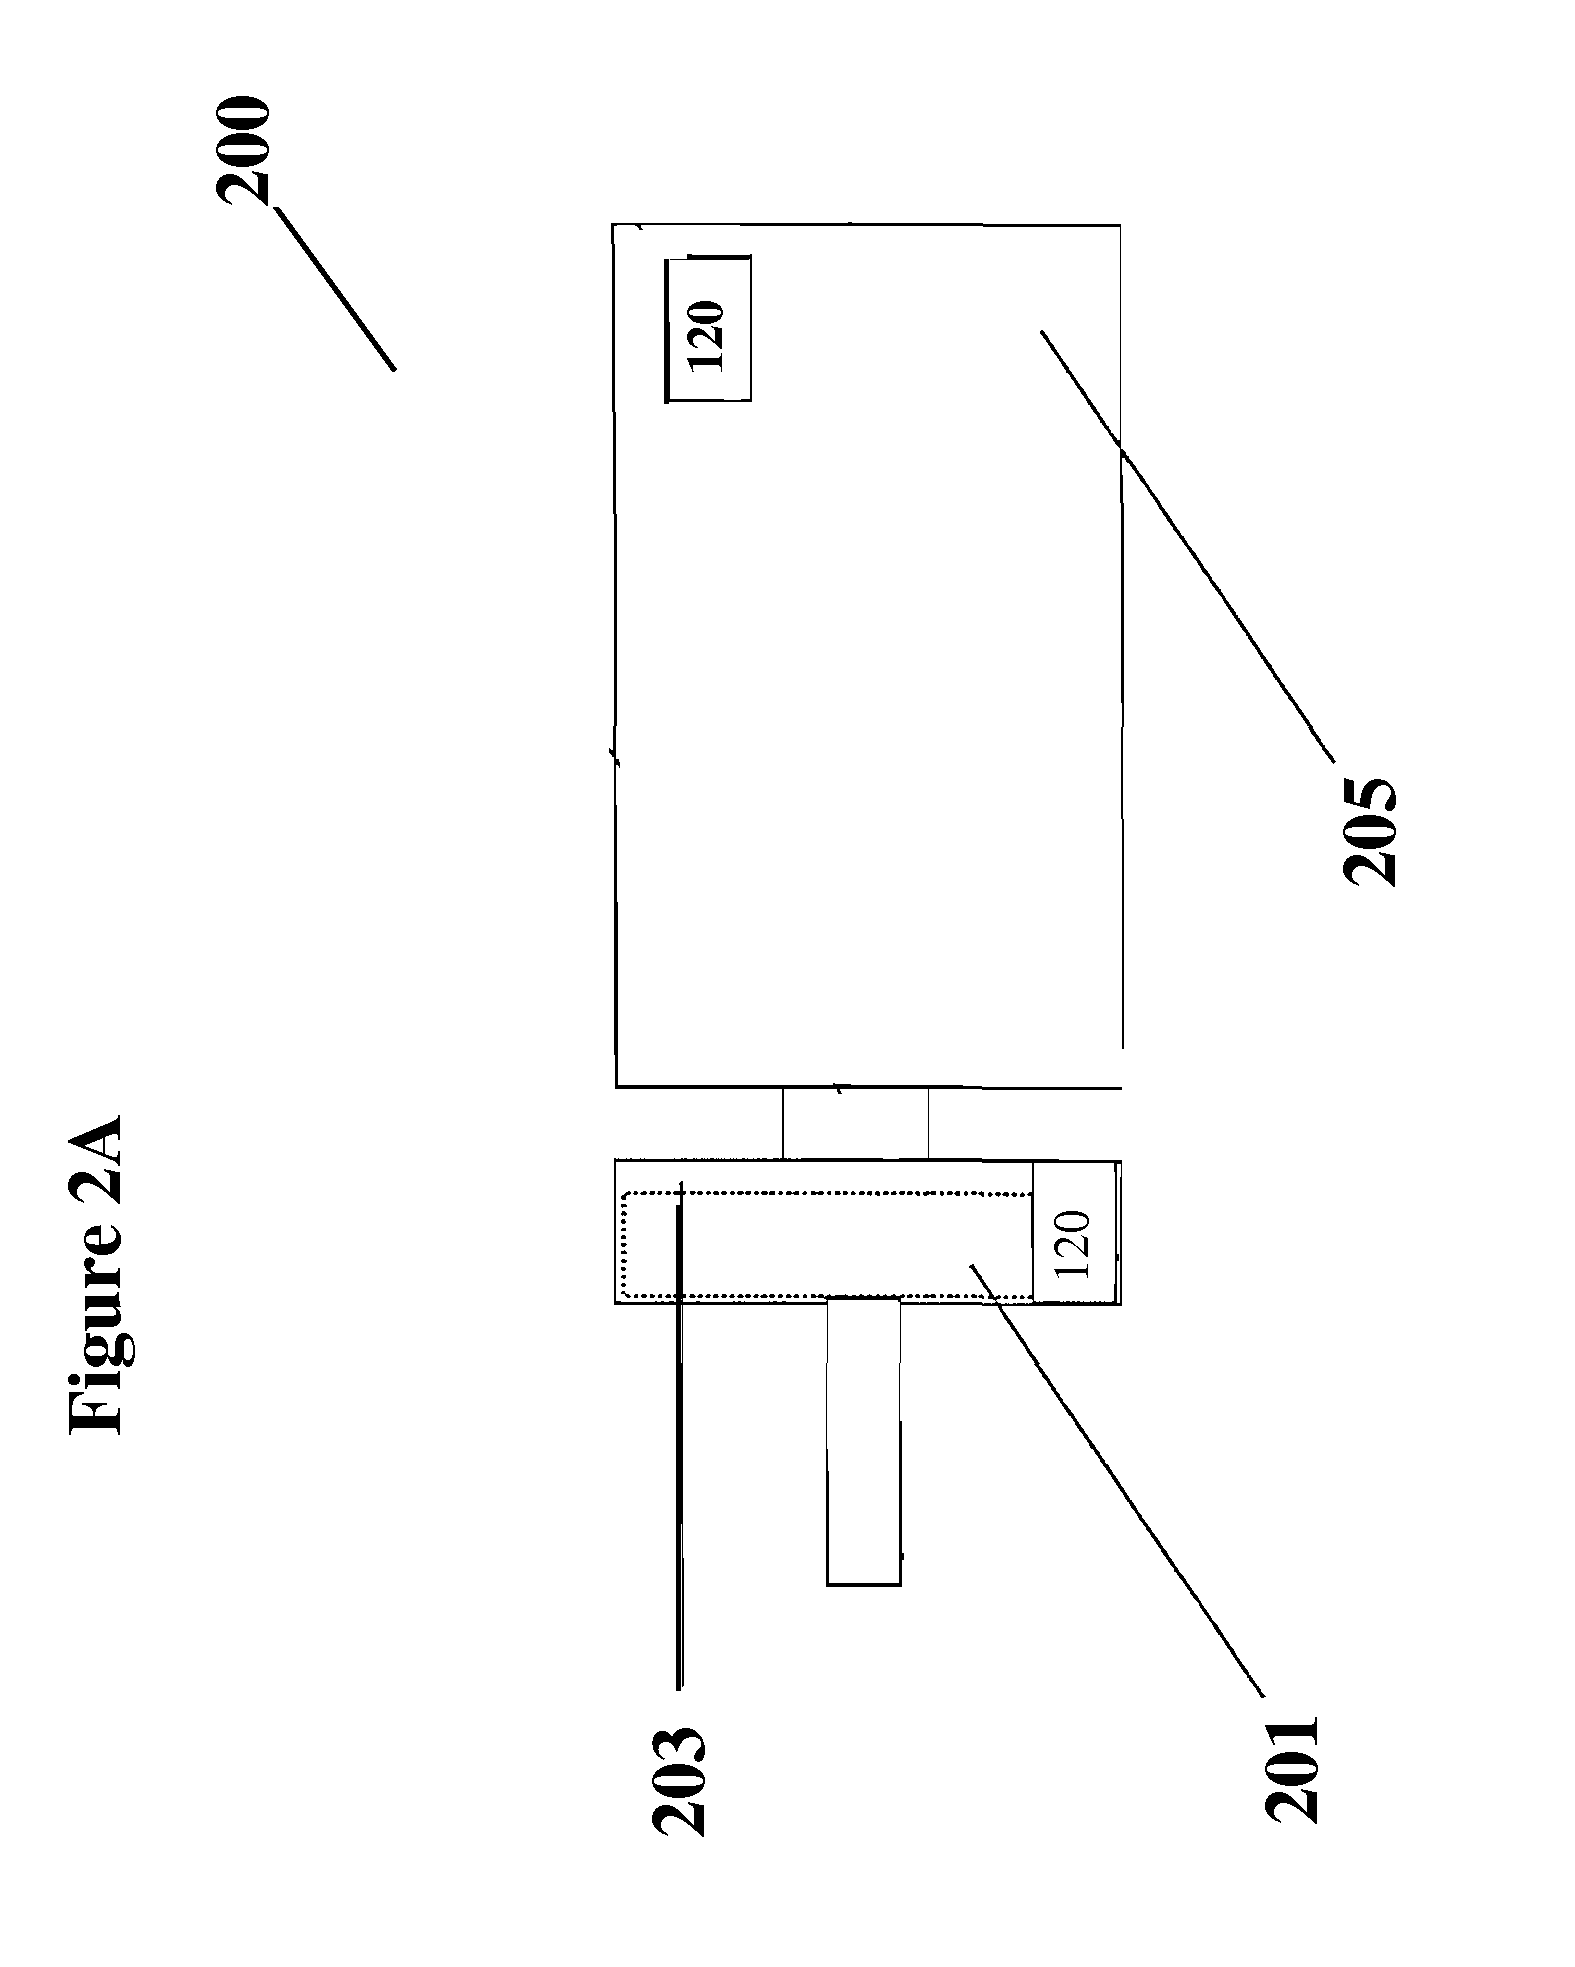 Integrated Blood Glucose Measurement Device